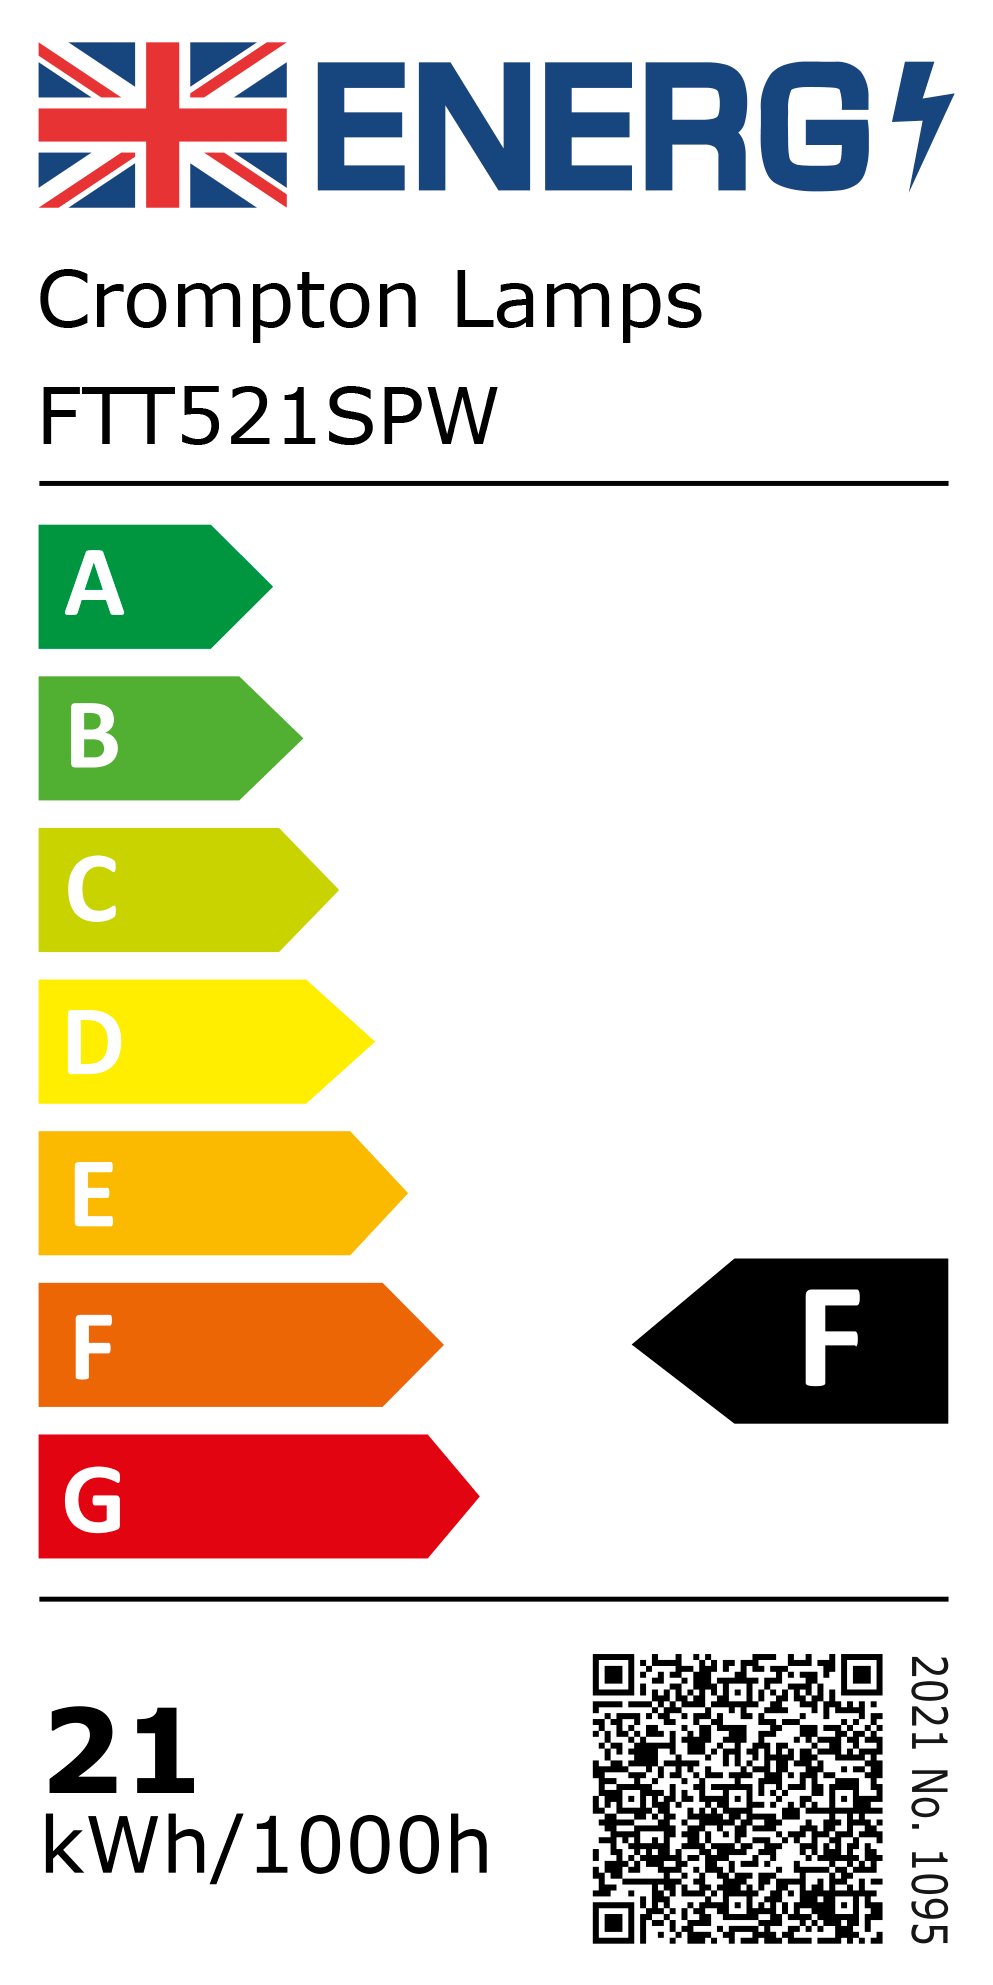 New 2021 Energy Rating Label: Stock Code FTT521SPW